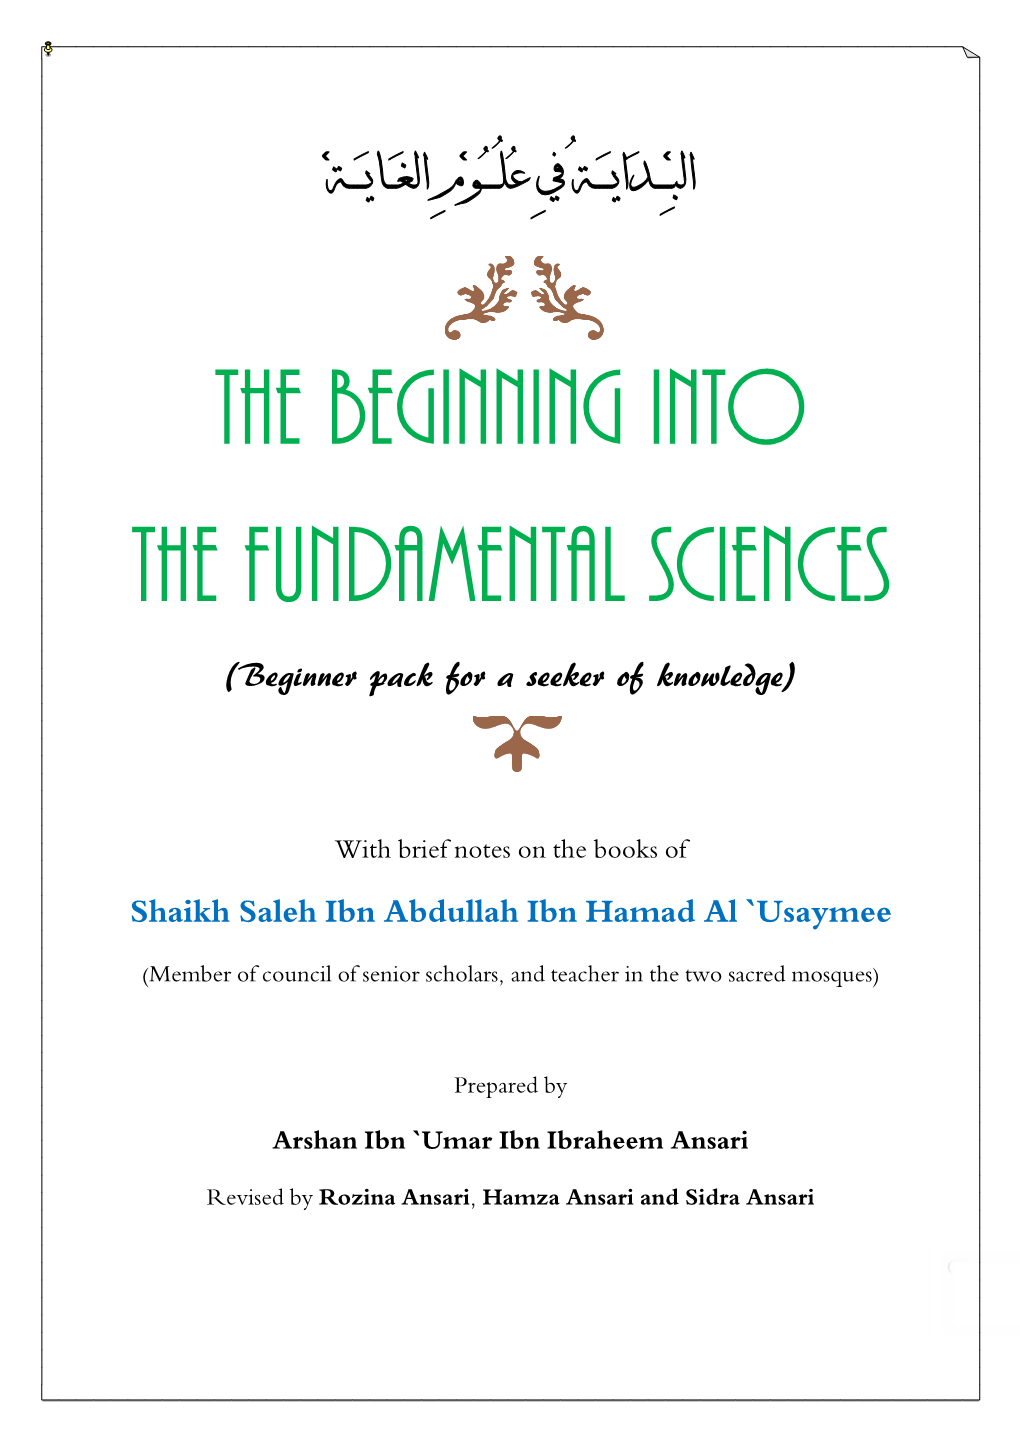 The Beginning Into the Fundamental Sciences